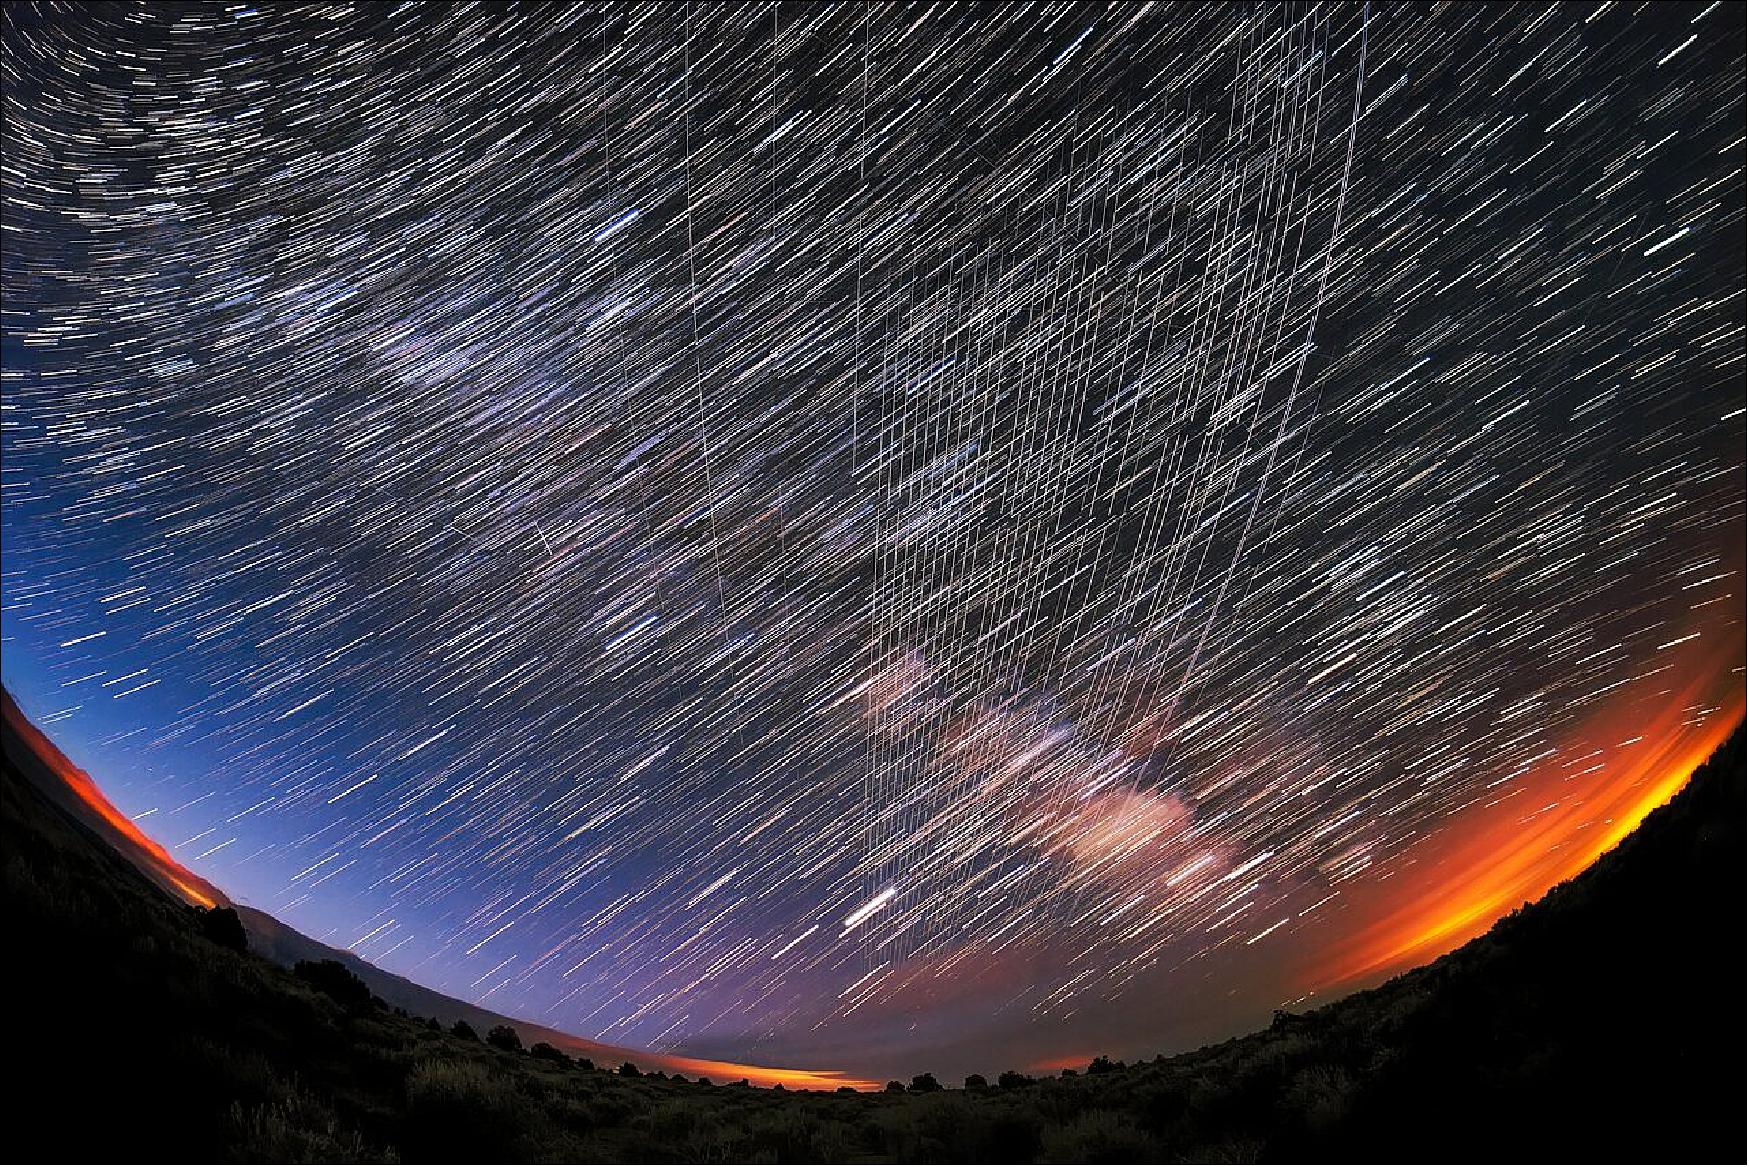 Figure 2: Starlink Satellites pass overhead near Carson National Forest, New Mexico, photographed soon after launch (image credit: M. Lewinsky/Creative Commons Attribution 2.0)